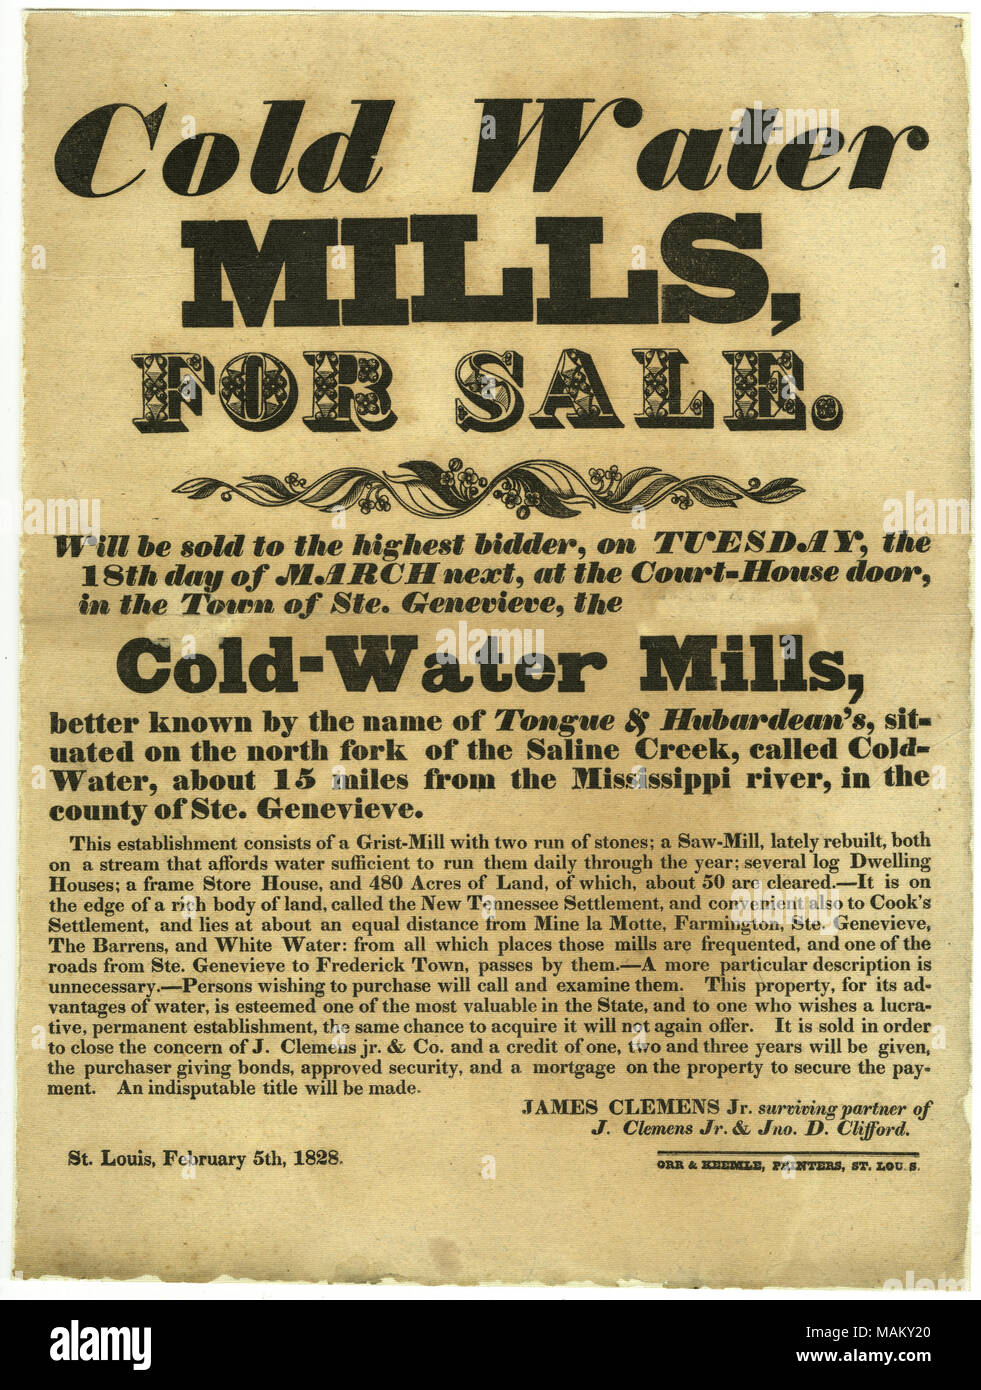 Broadside: Cold Water Mills for Sale, Ste. Genevieve, February 5, 1828. Broadsides Collection, Missouri History Museum Archives, St. Louis. ID Number=A0181-29664. Stock Photo